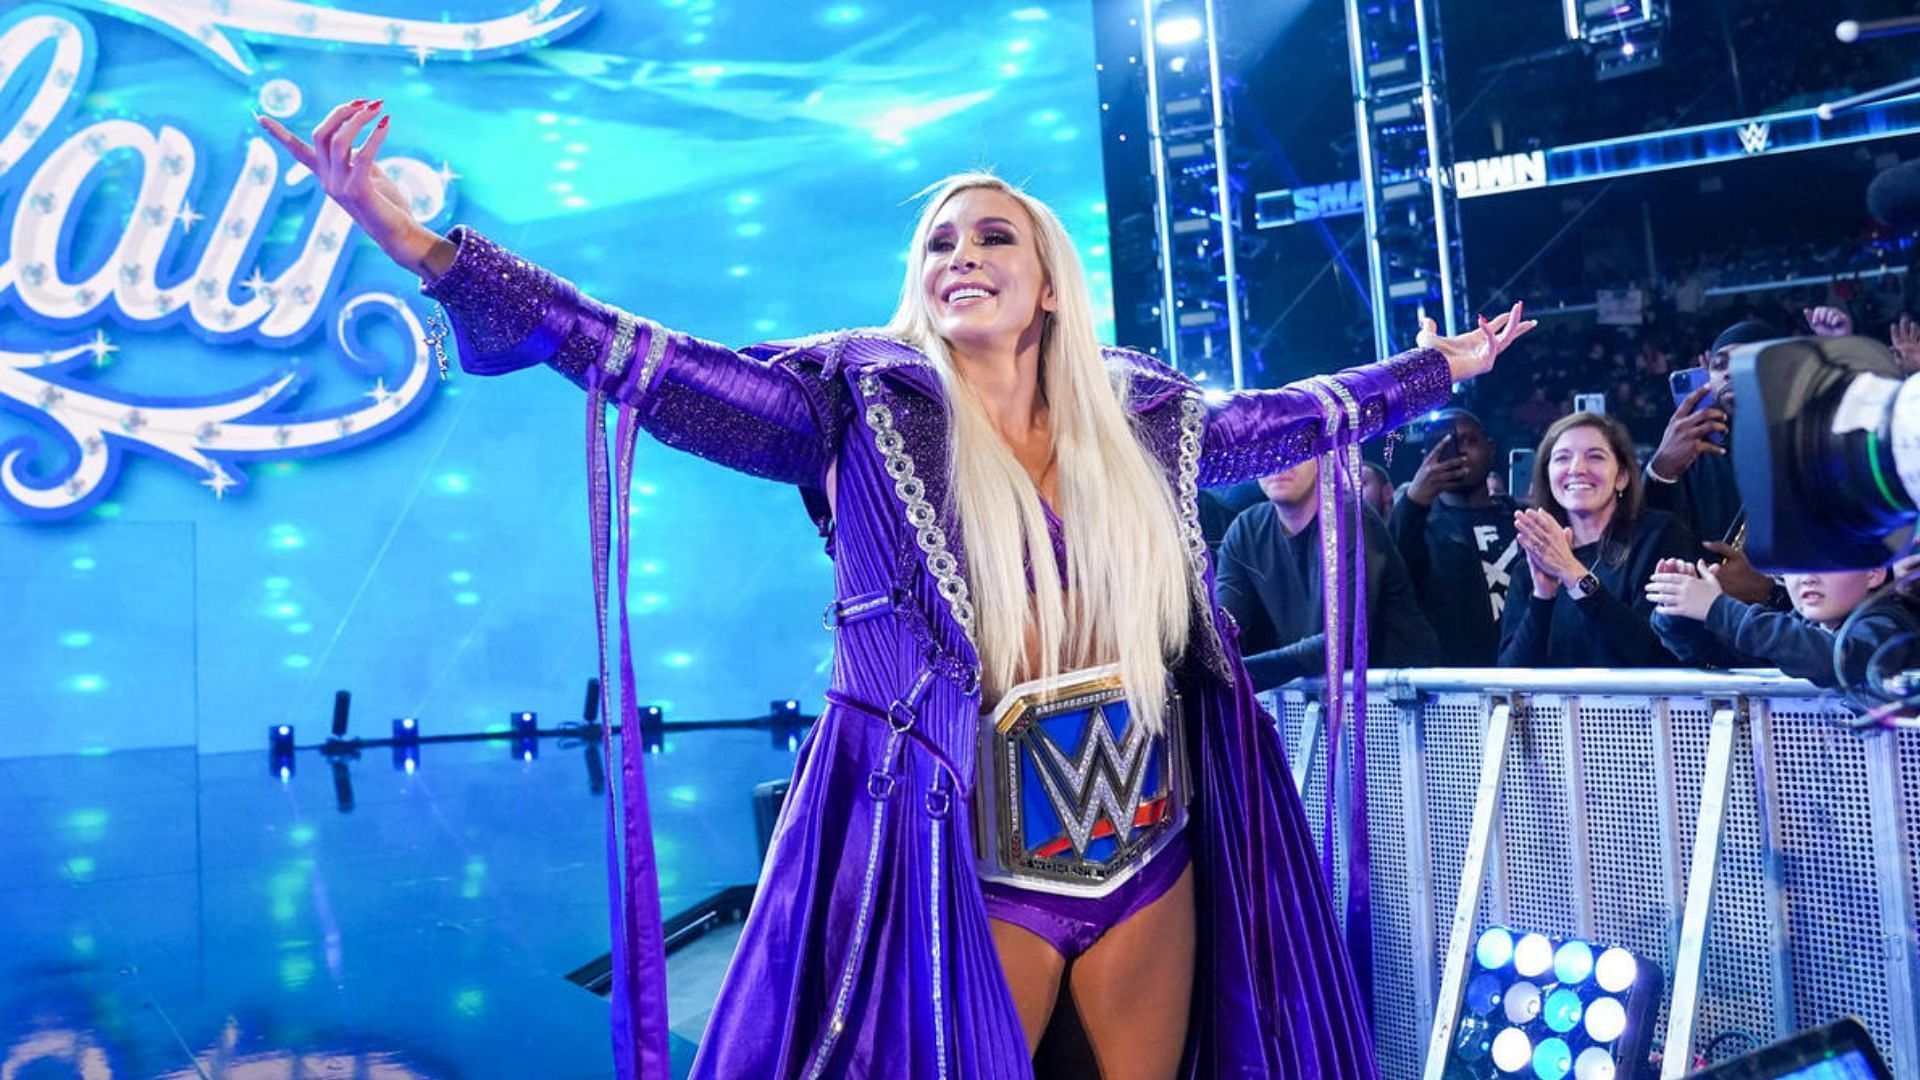 Charlotte Flair is a 14-time Women